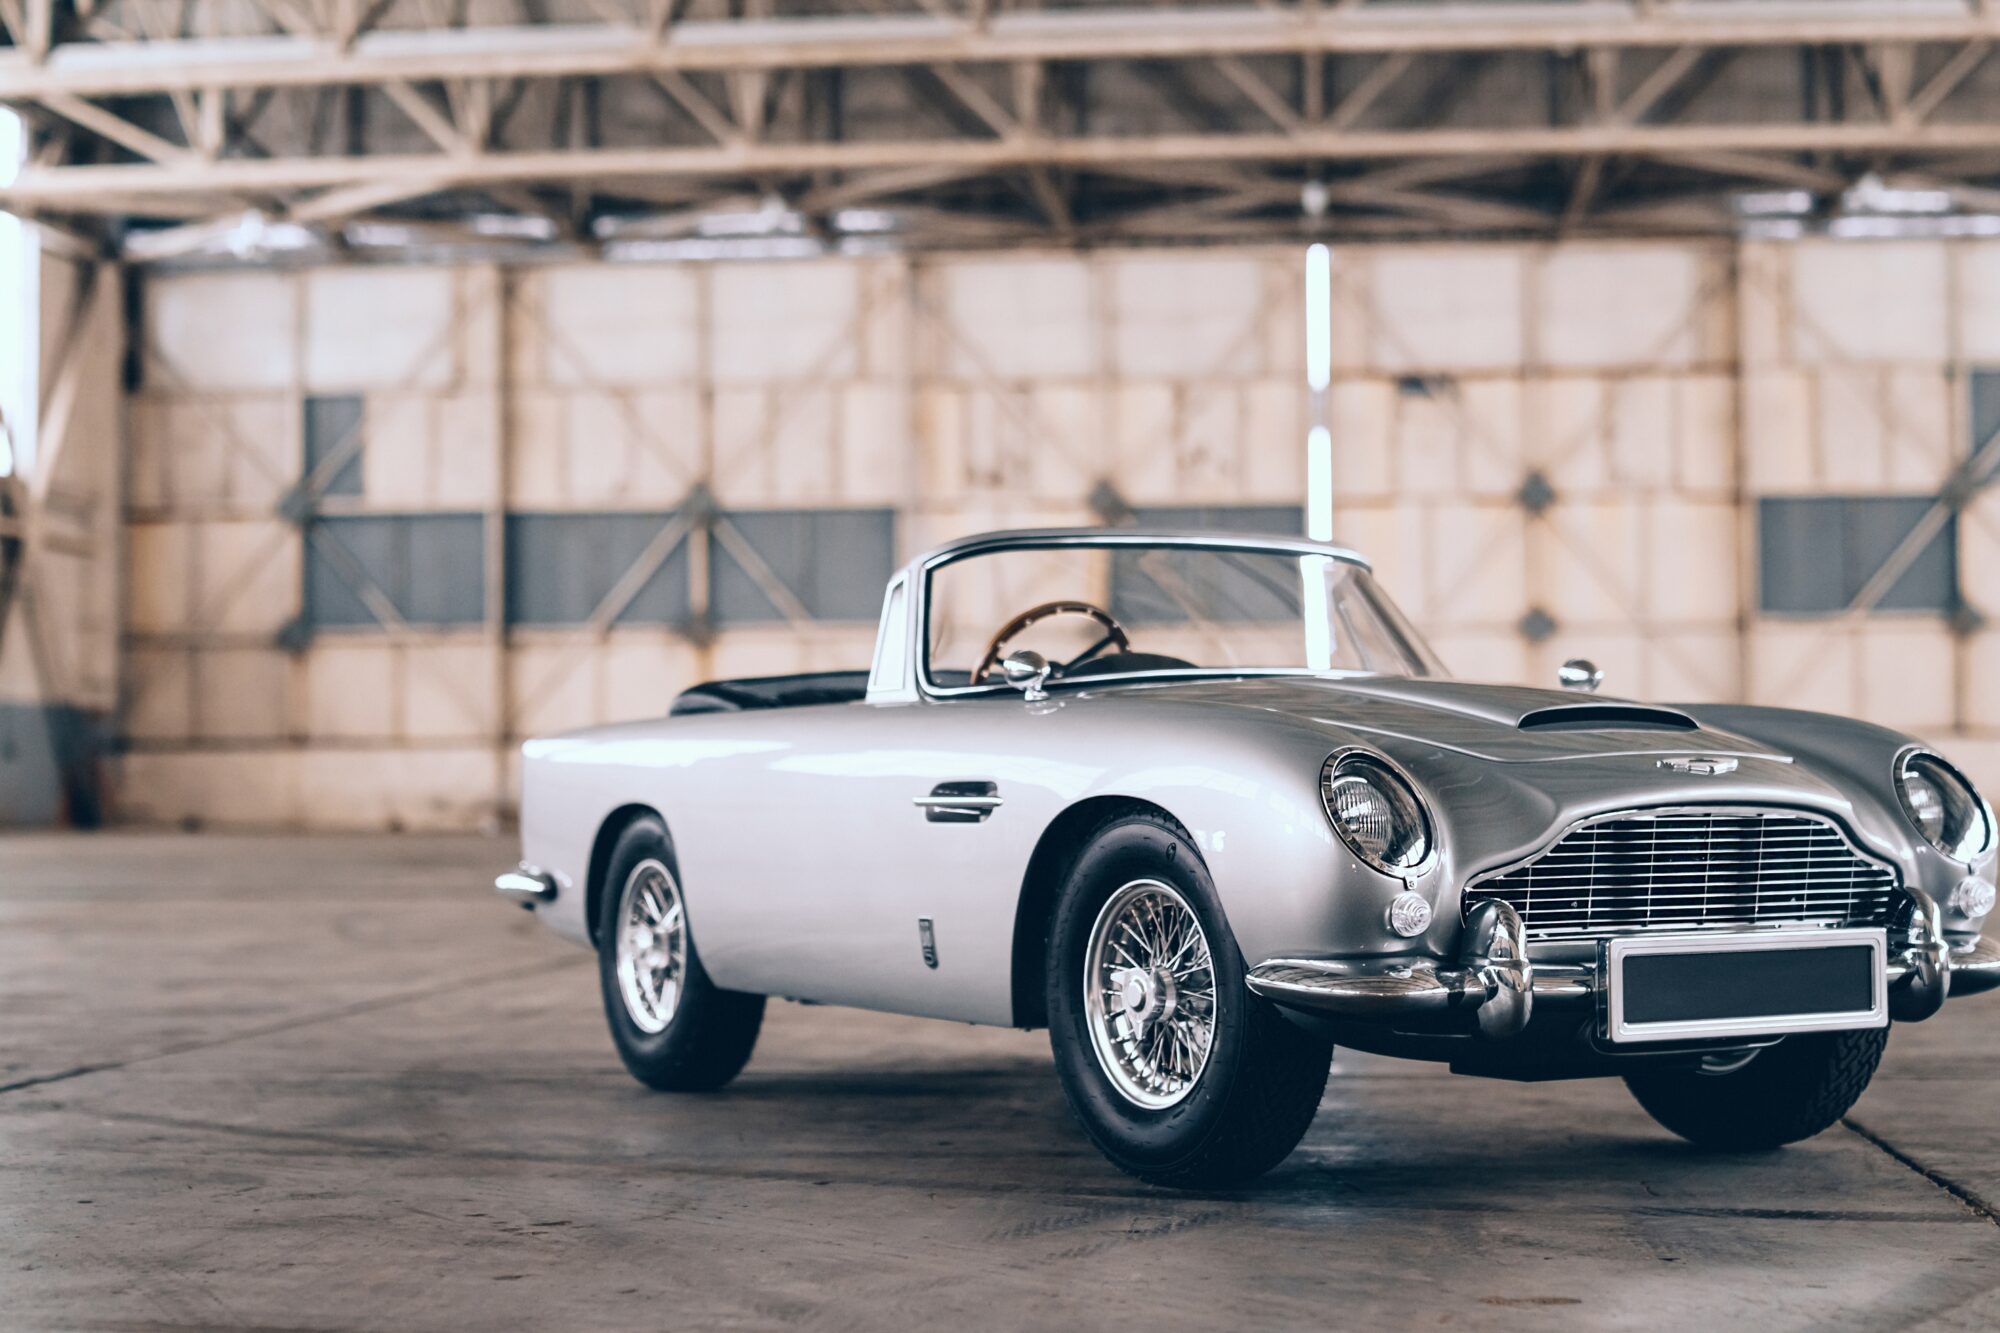 No time for the battery to die: Bond's Aston Martin goes electric